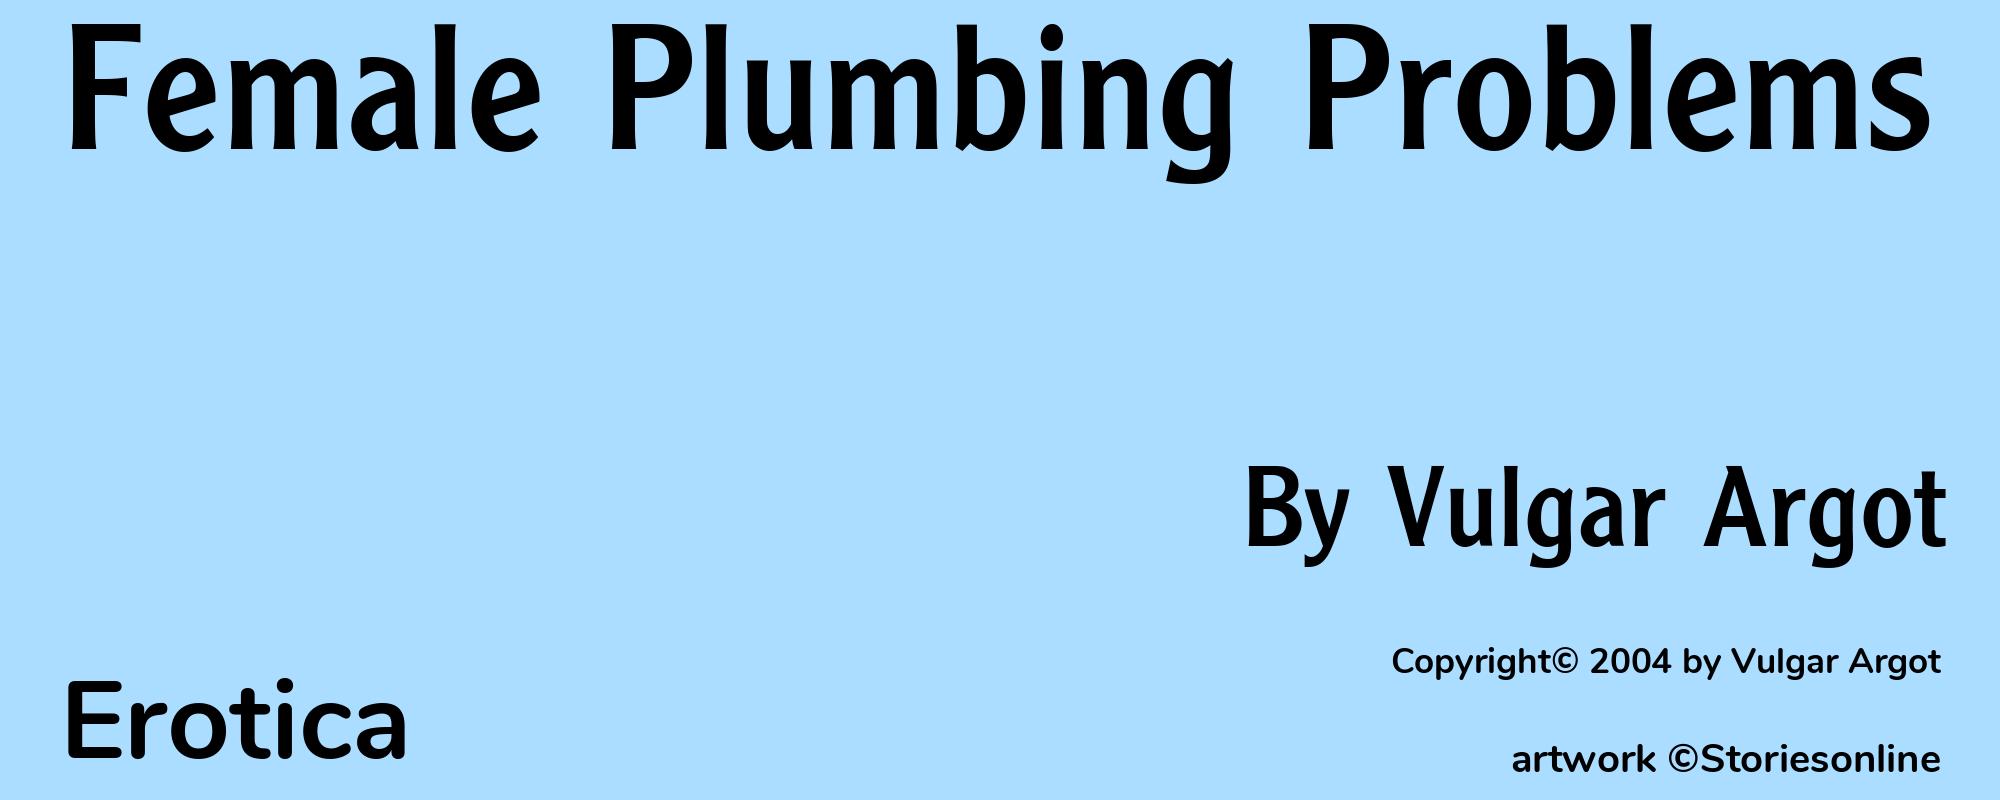 Female Plumbing Problems - Cover